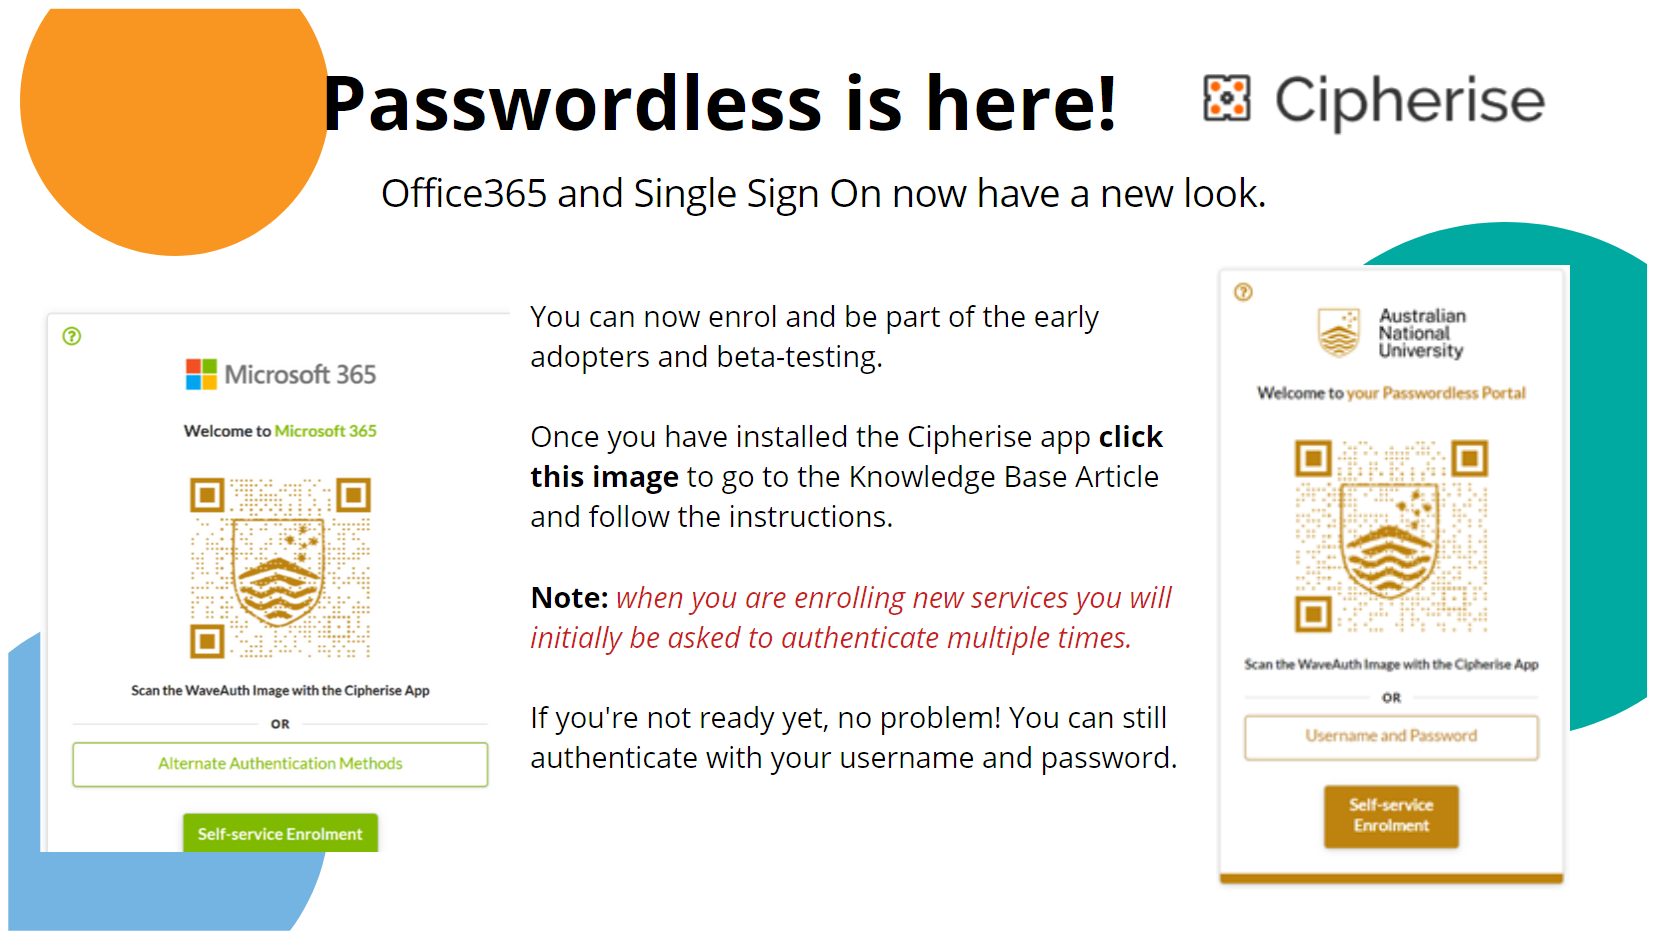 What you will see when logging in after passwordless arrives.